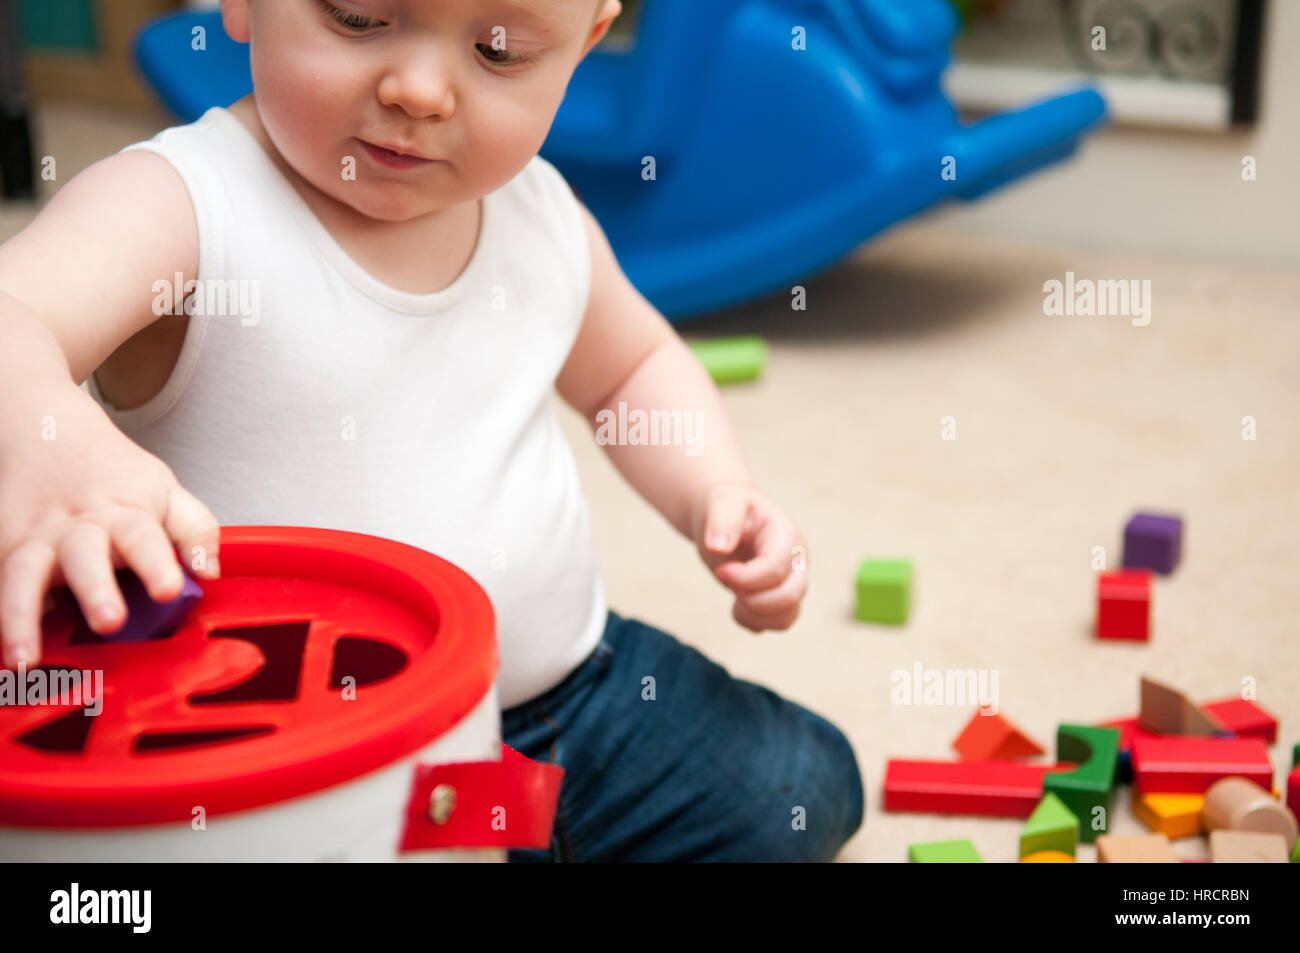 baby playing with blocks and sorting shapes Stock Photo